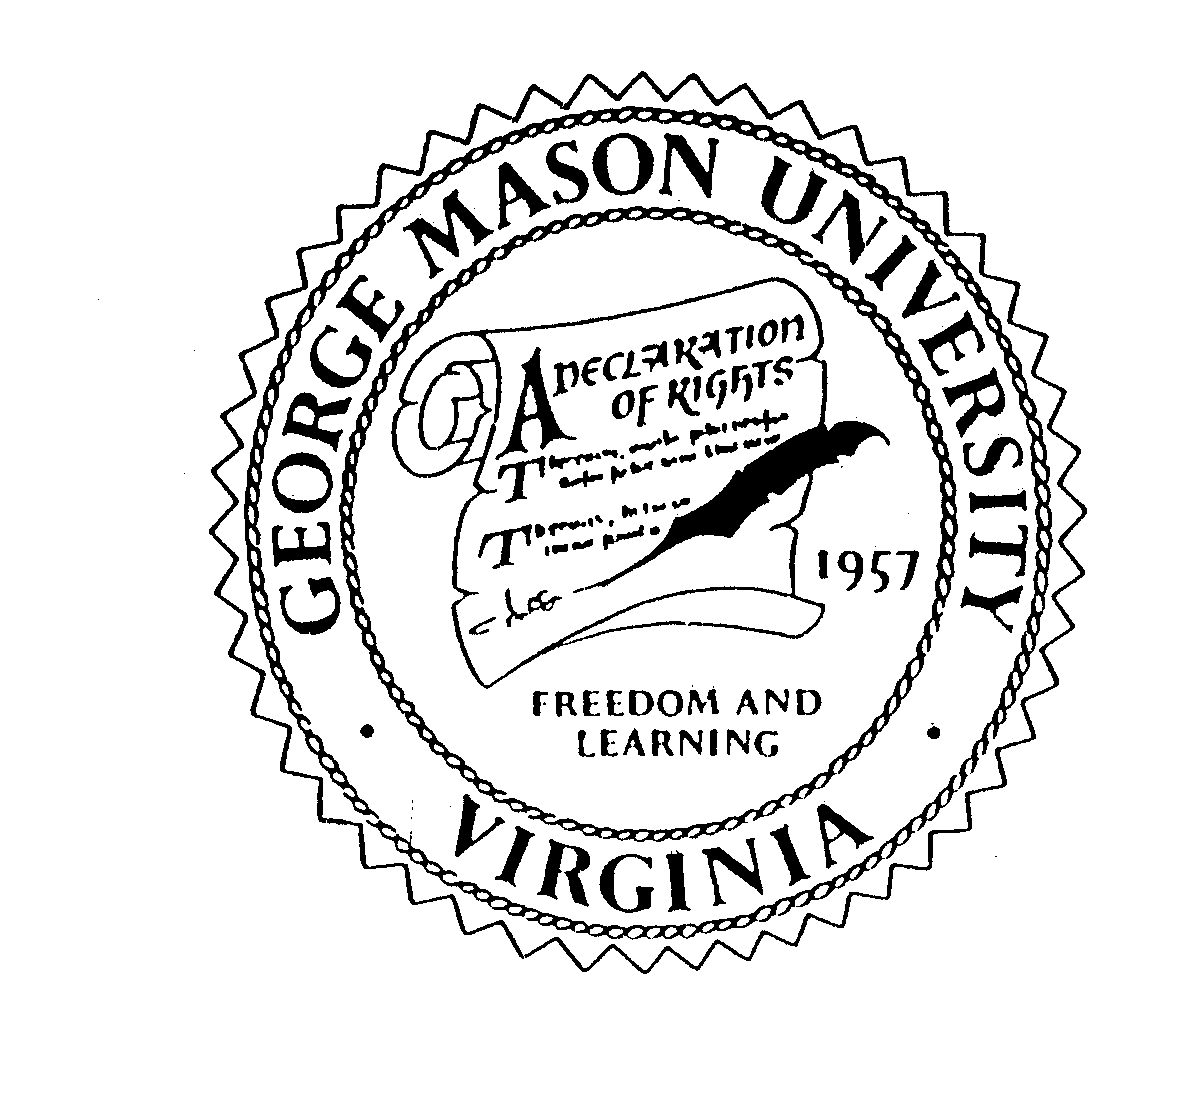  GEORGE MASON UNIVERSITY VIRGINIA A DECLARATION OF RIGHTS 1957 FREEDOM AND LEARNING